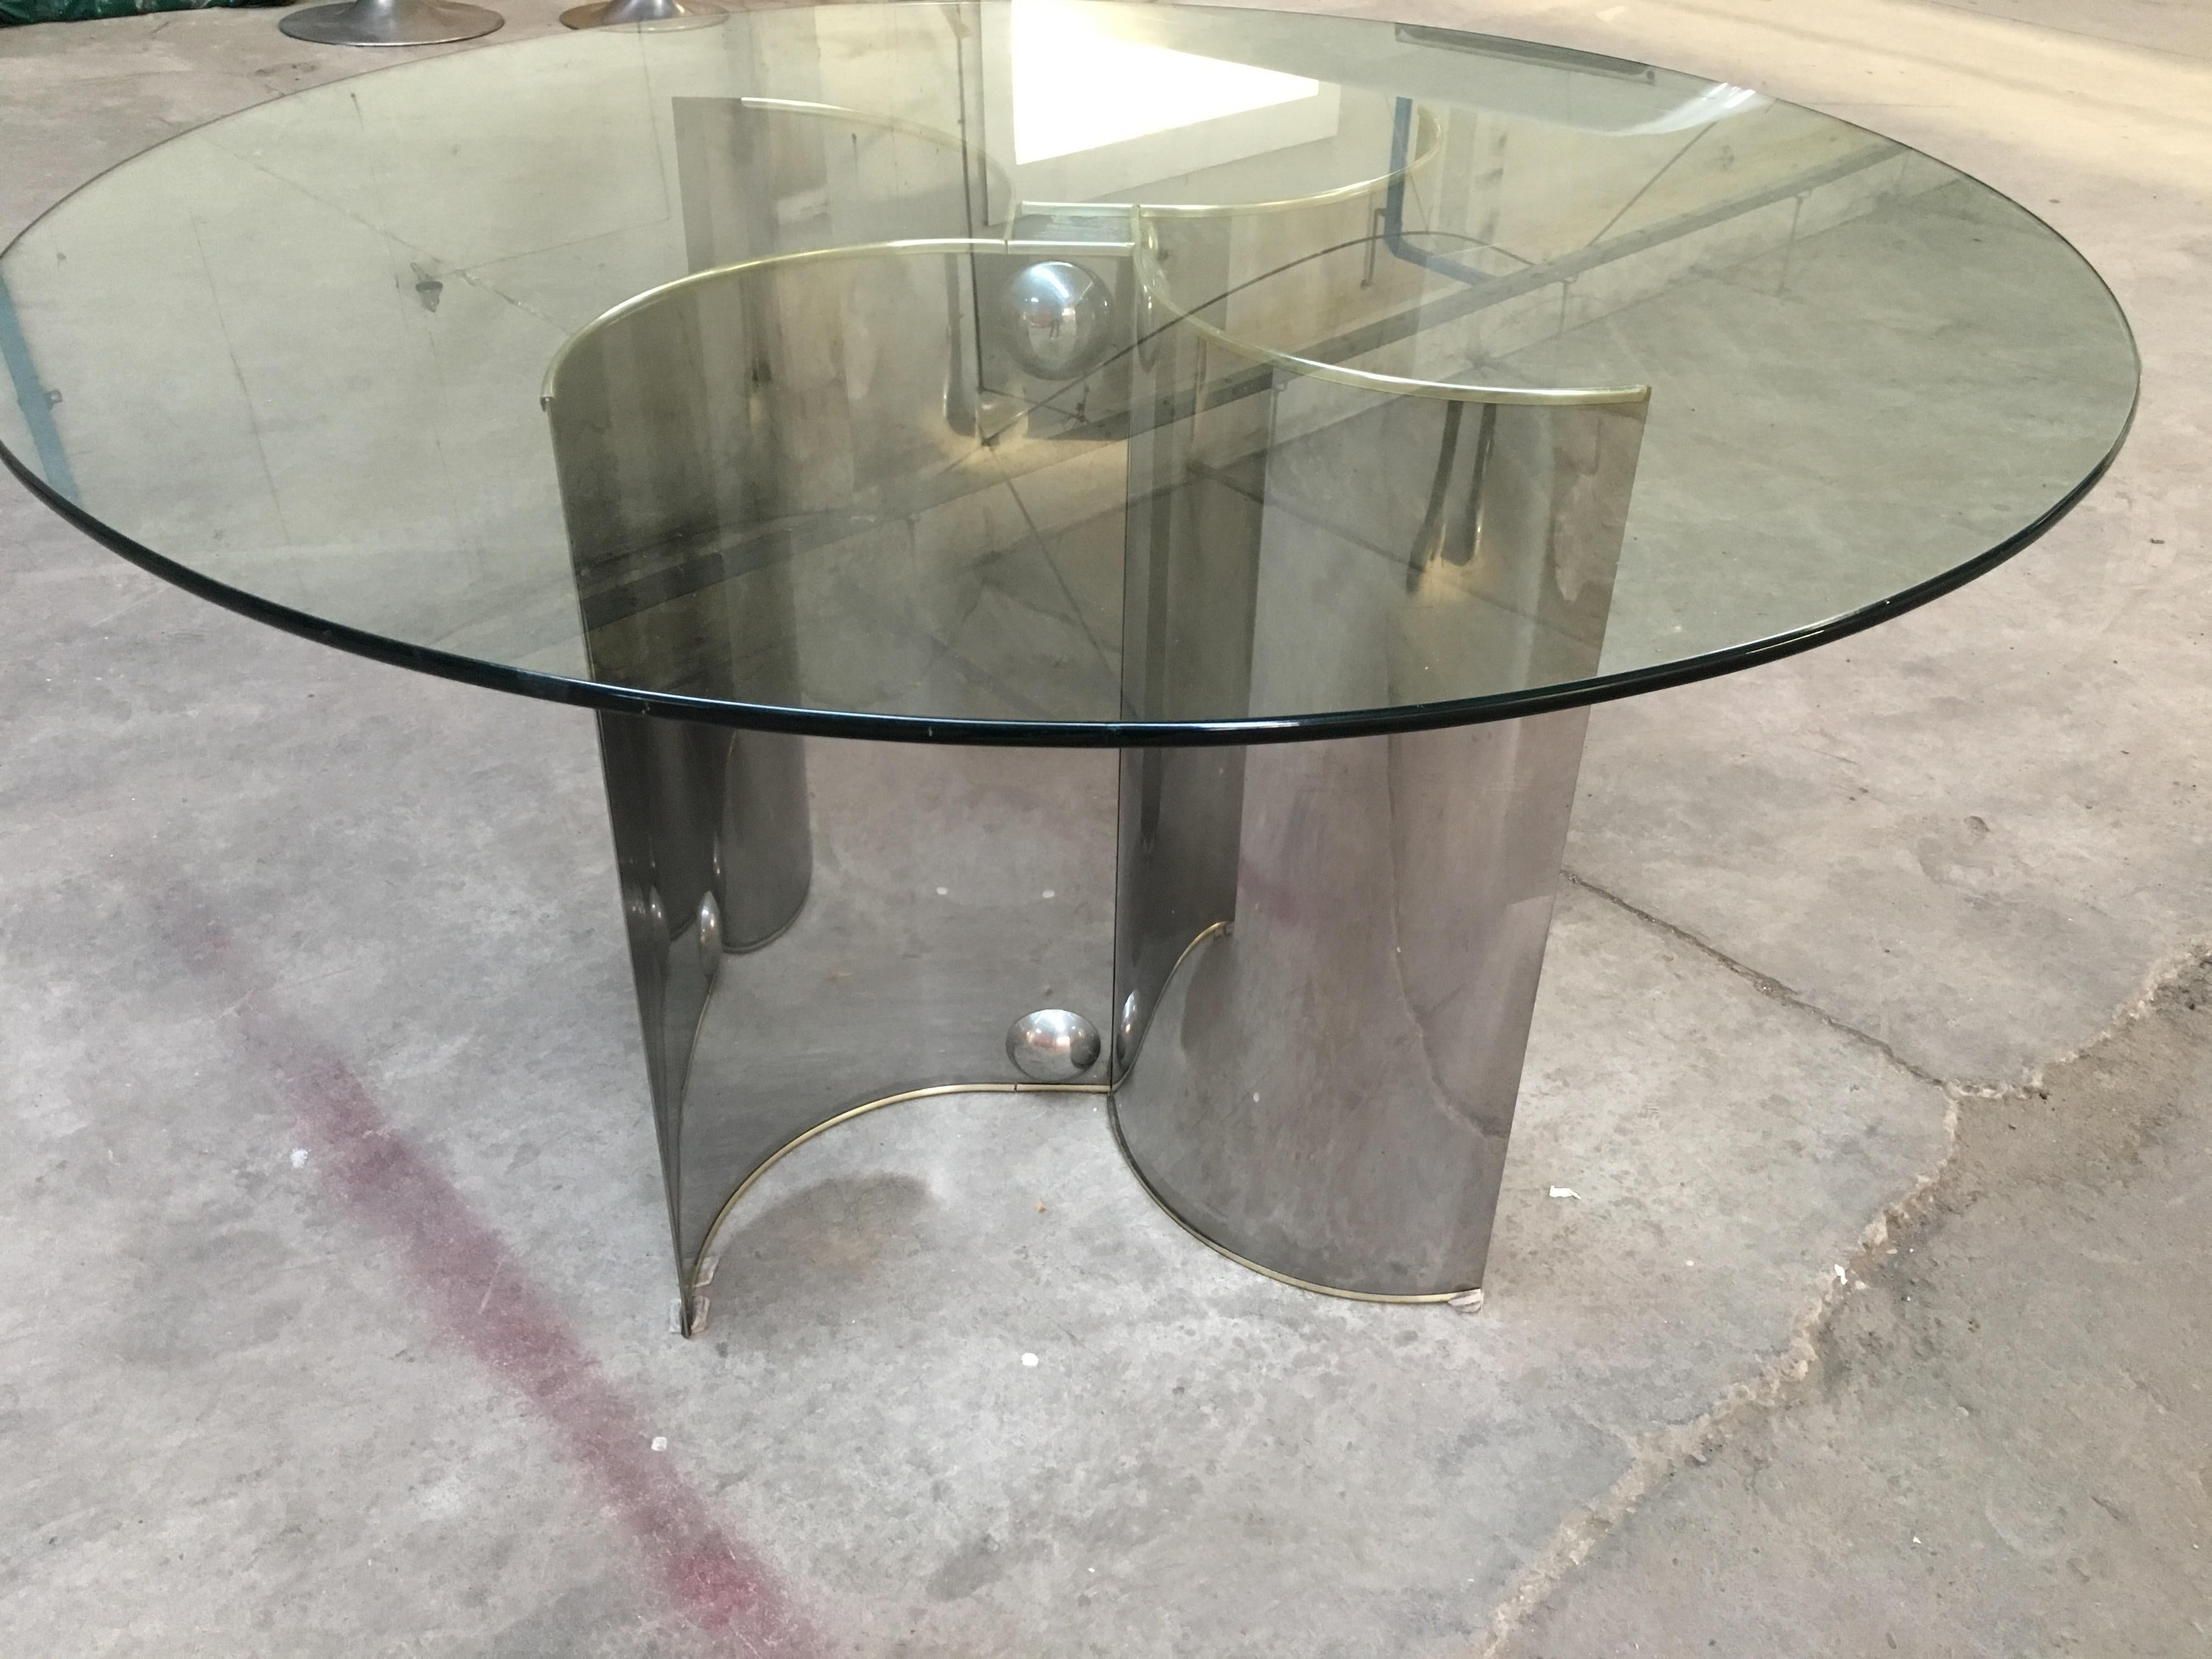 Late 20th Century Mid-Century Modern Italian Chrome Base Dining Table with Glass Top, 1970s